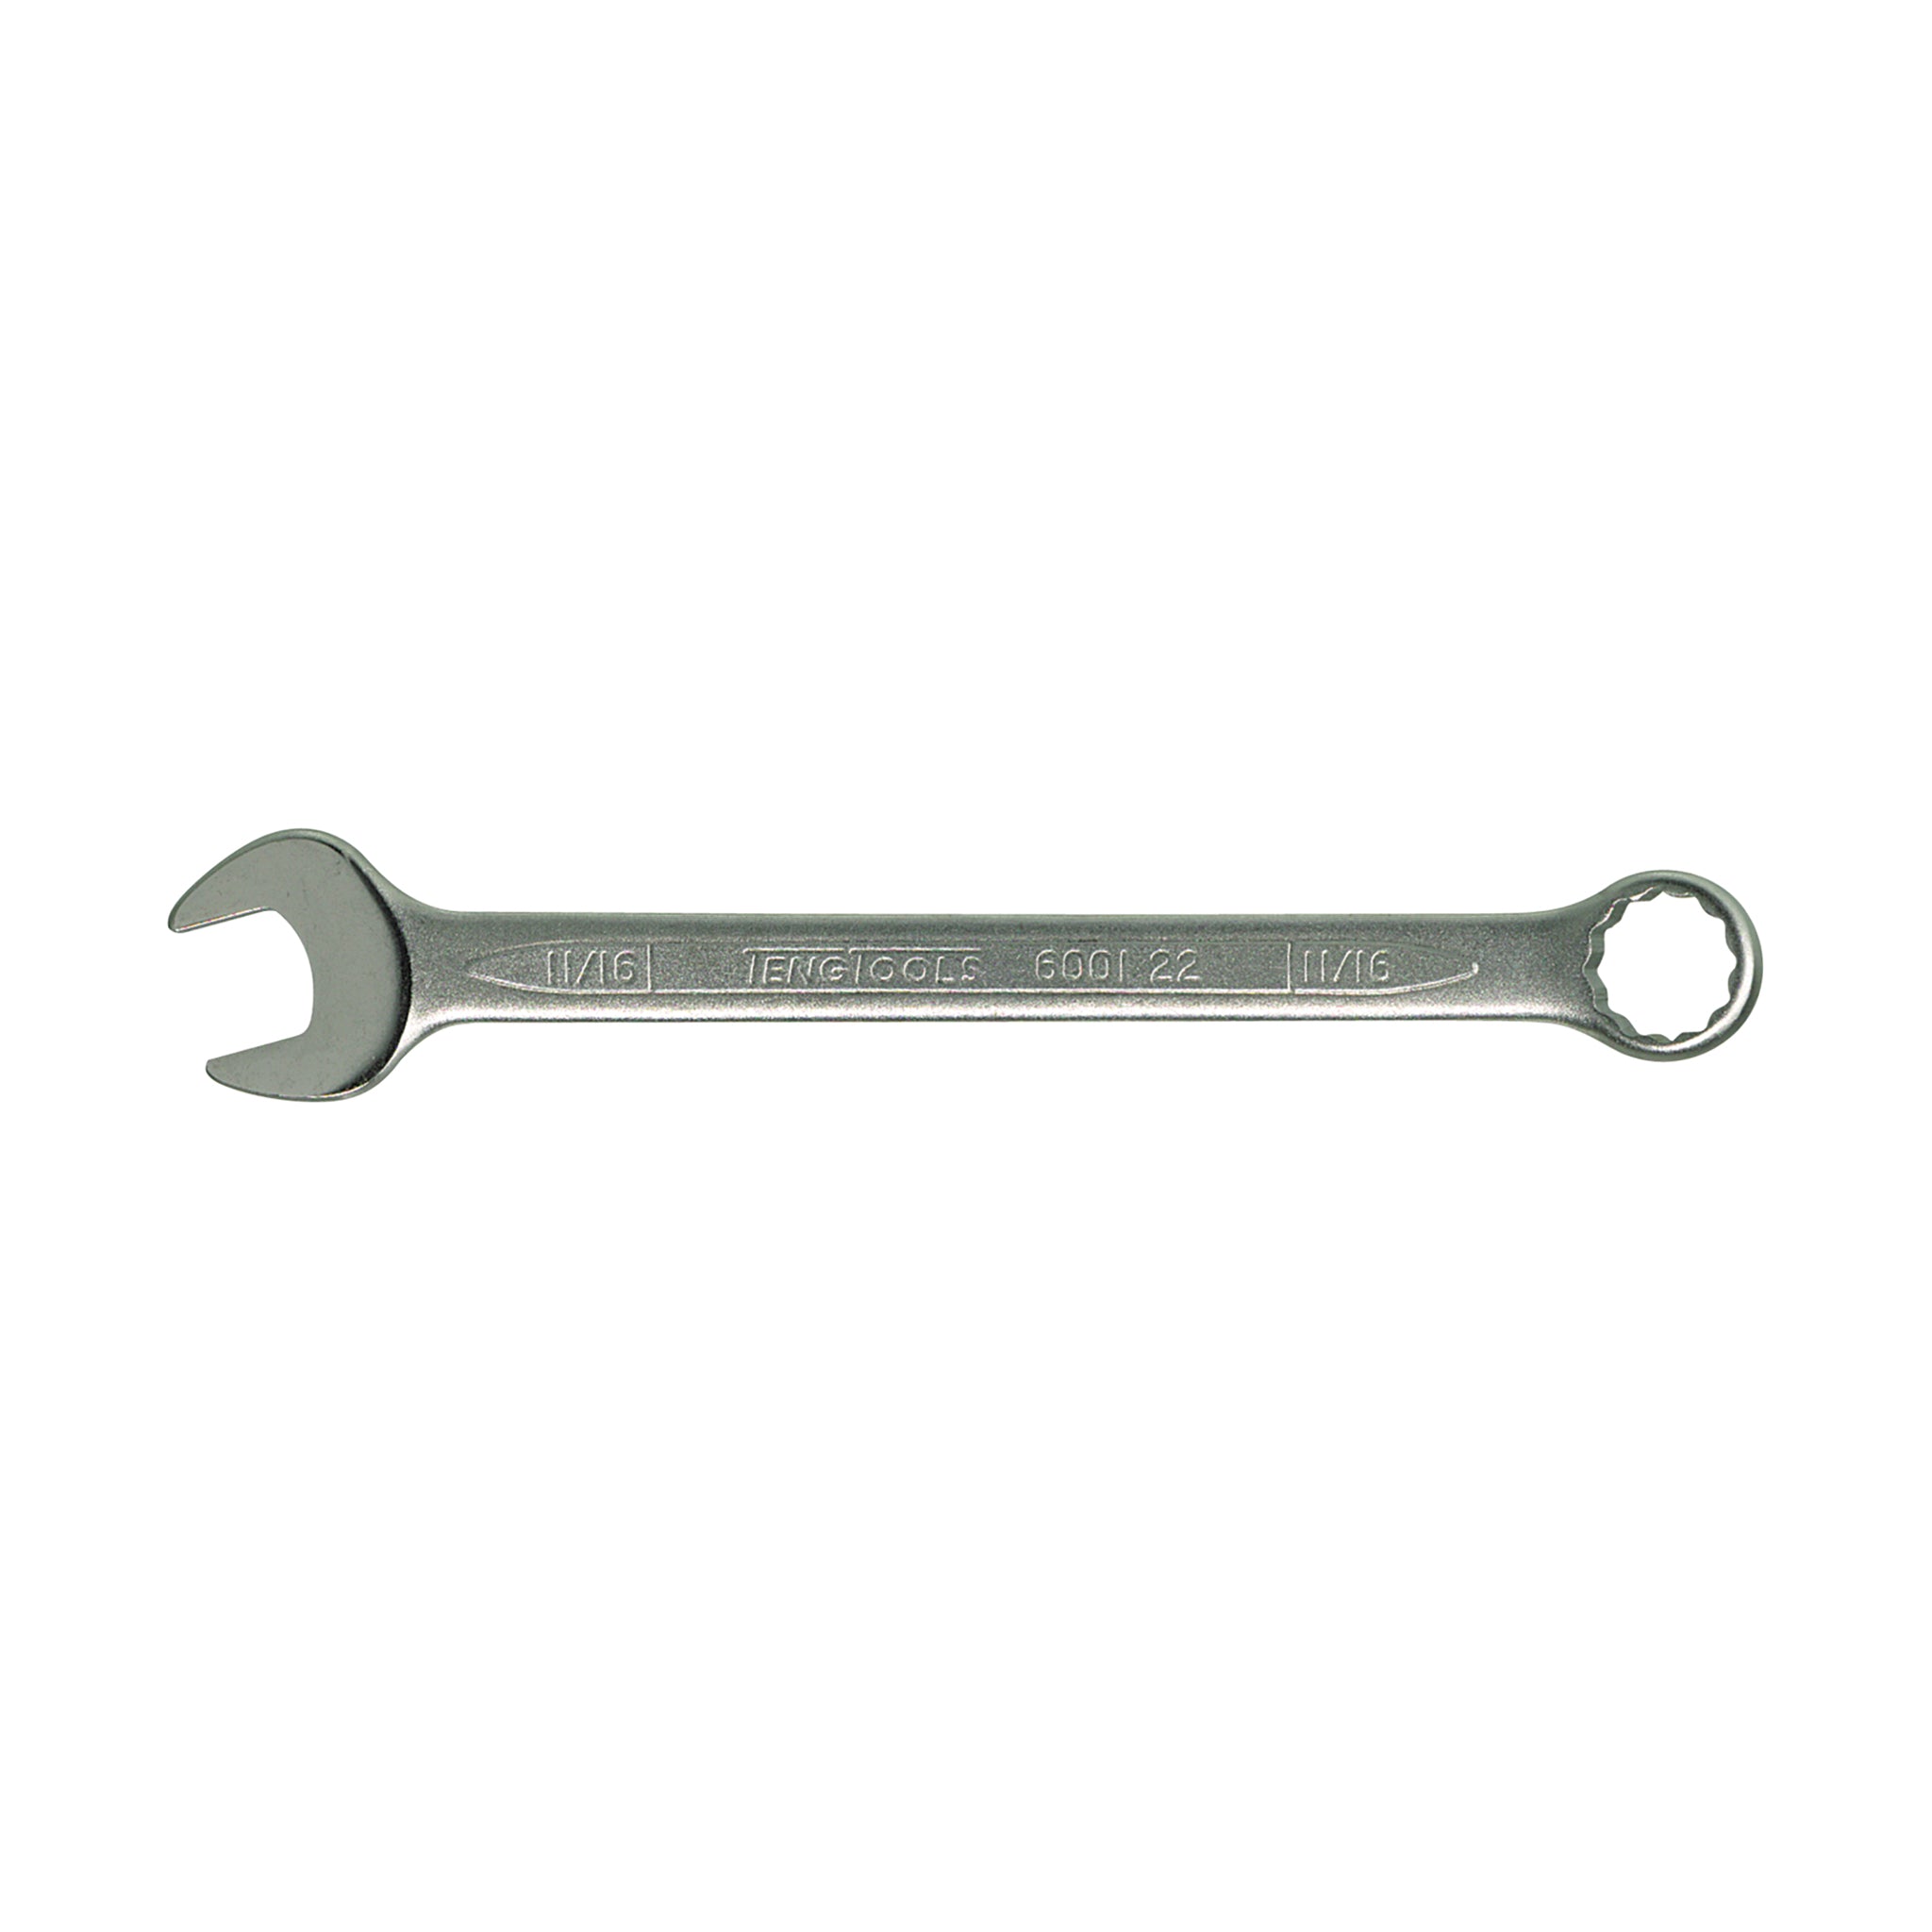 Standard Combination SAE Wrenches Made With Chrome Vanadium Steel - 3/8